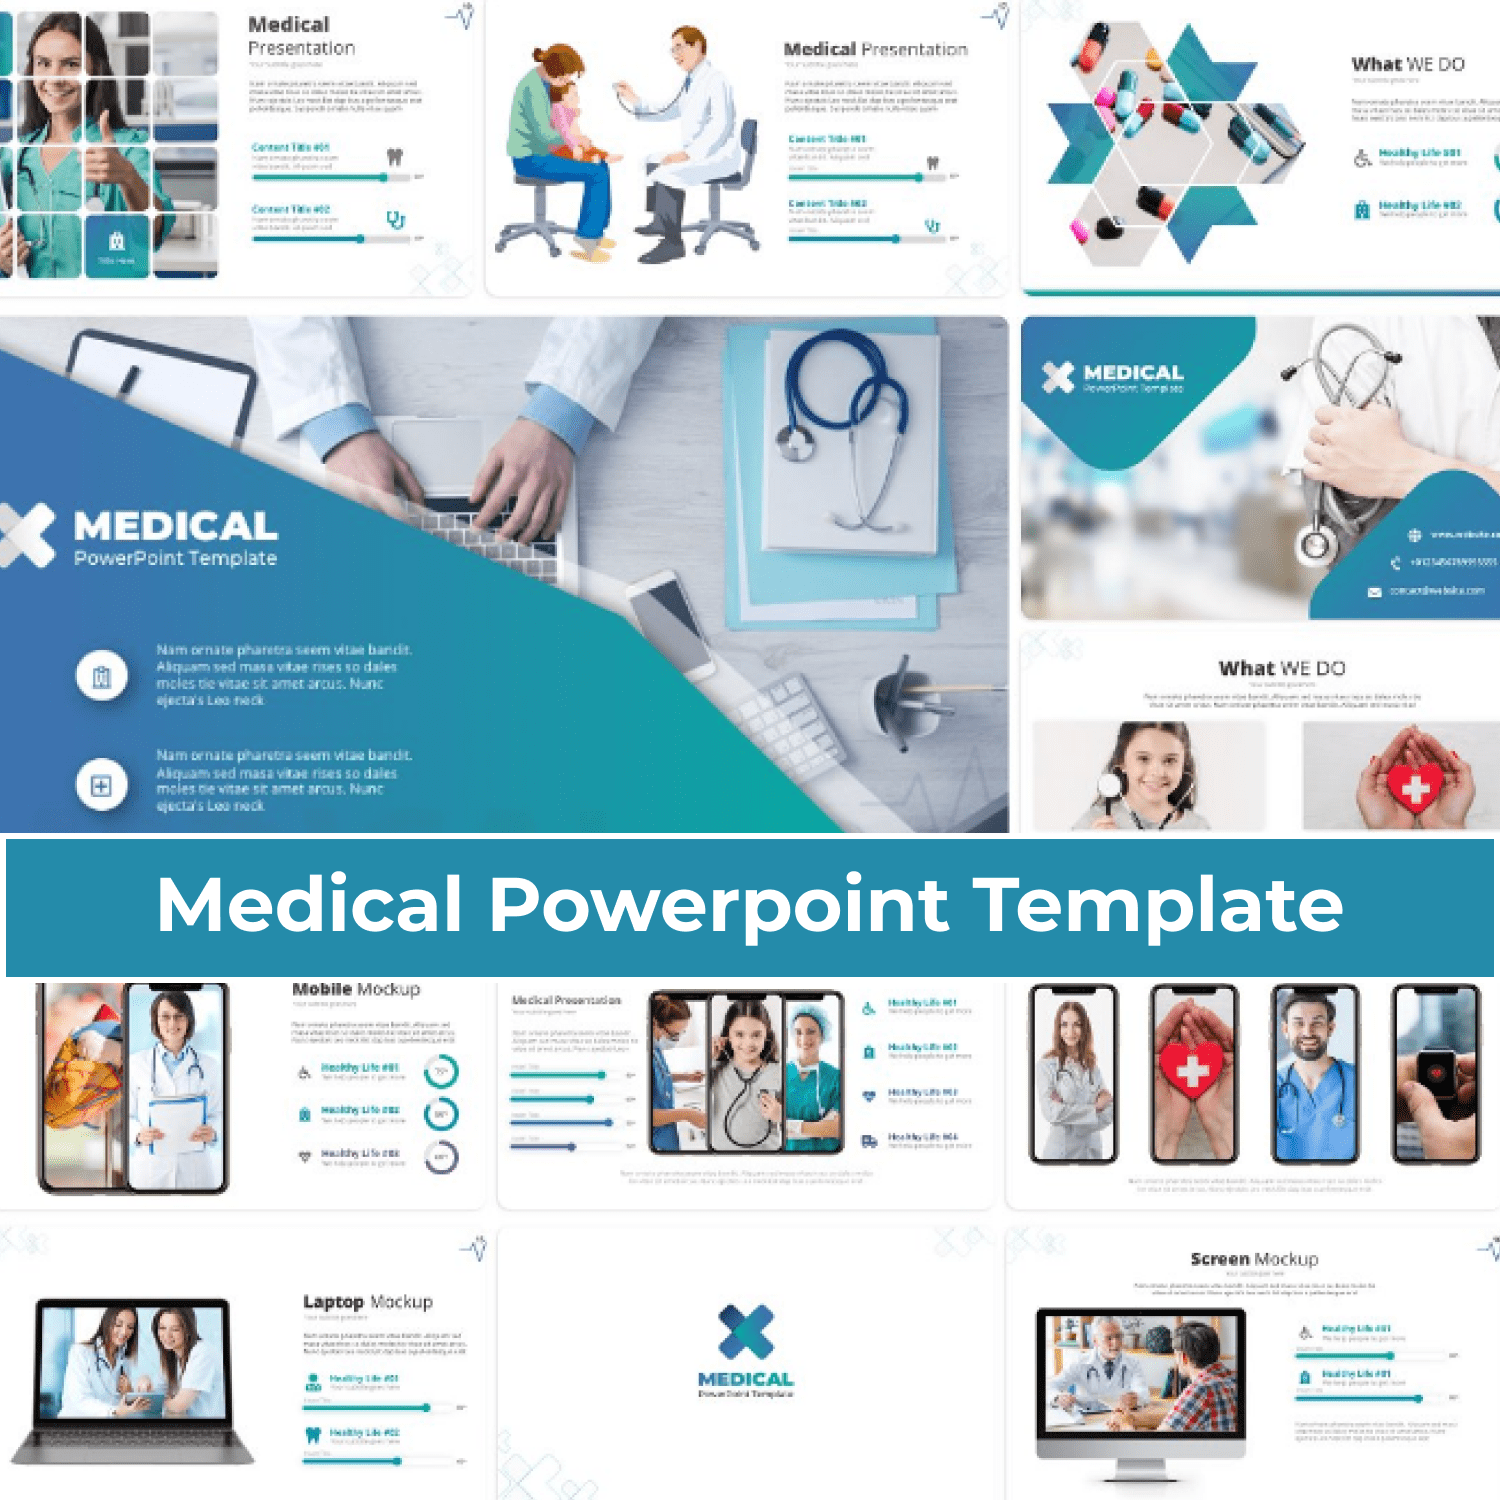 Medical Powerpoint Template cover image.